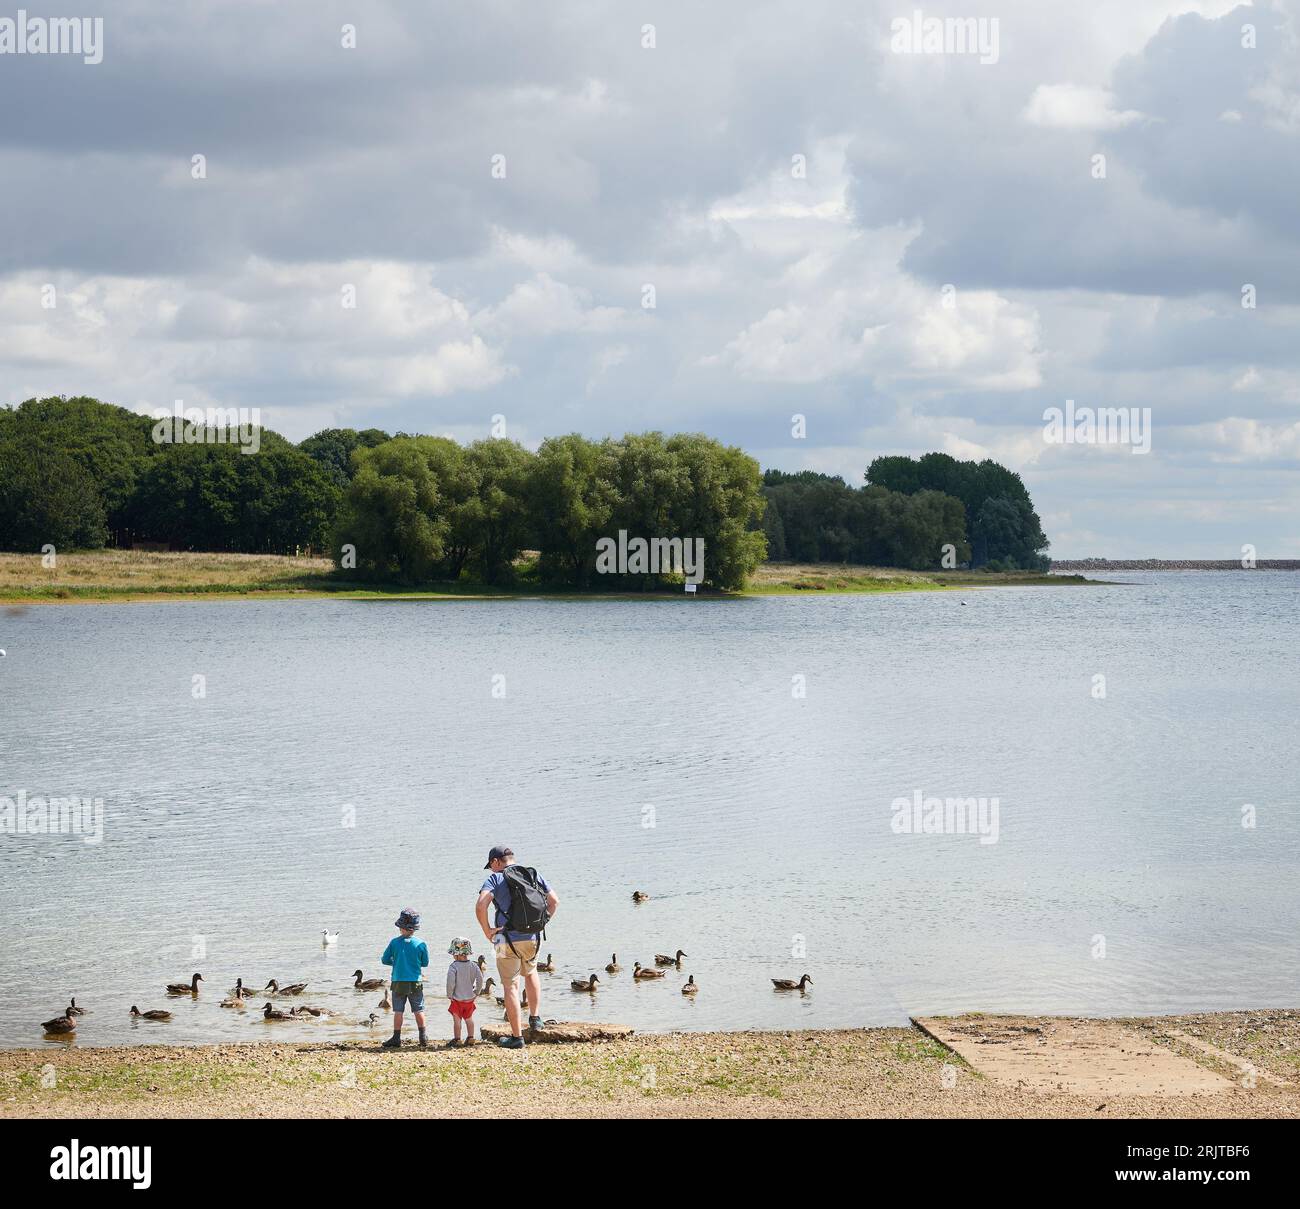 A family of father and two young sons stand at a lakeside watching ducks. Stock Photo